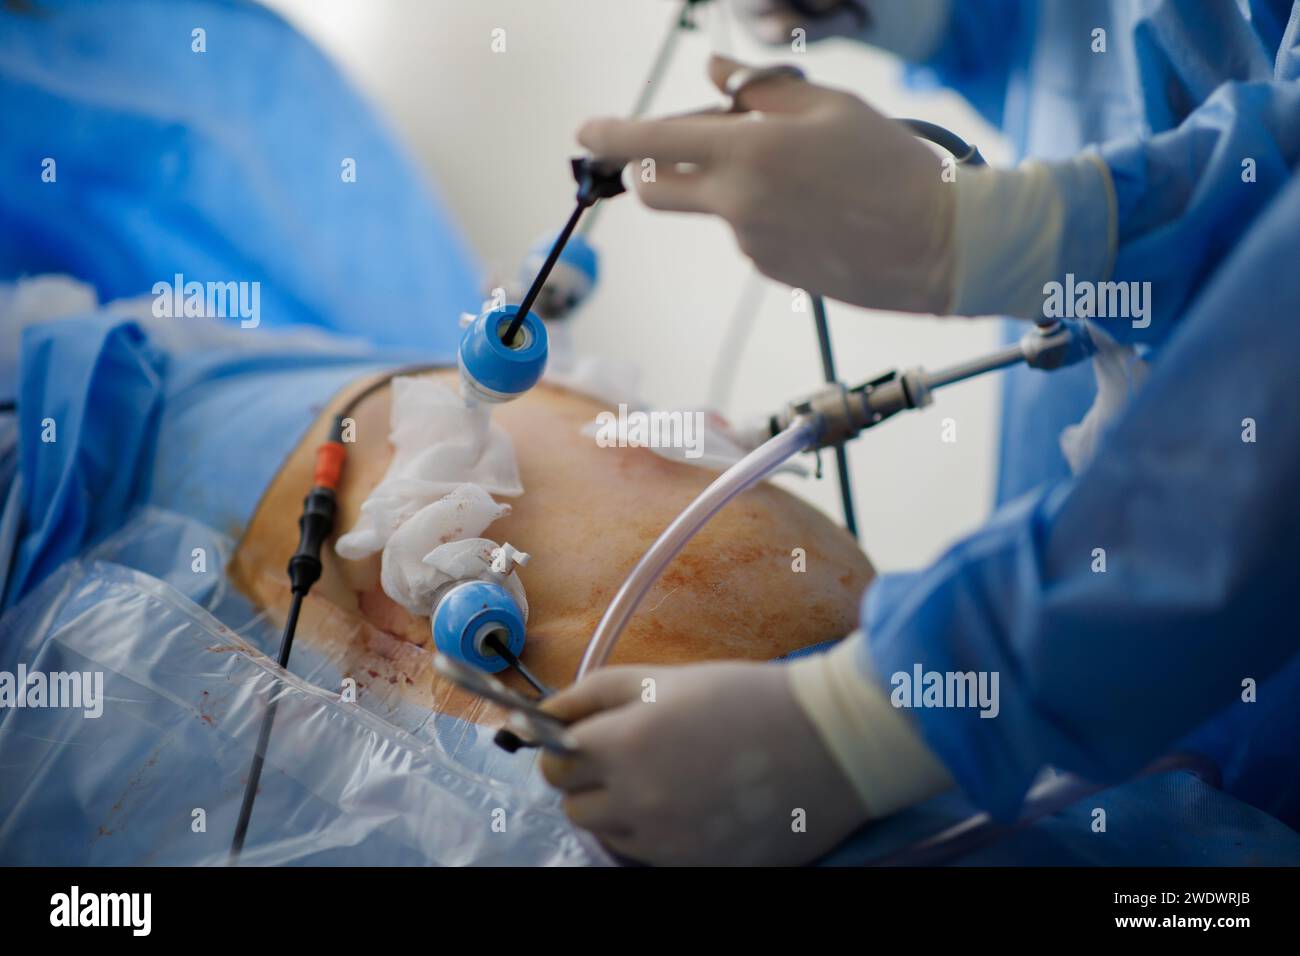 doctors perform laparoscopy operations in the intensive care unit. High quality photo Stock Photo